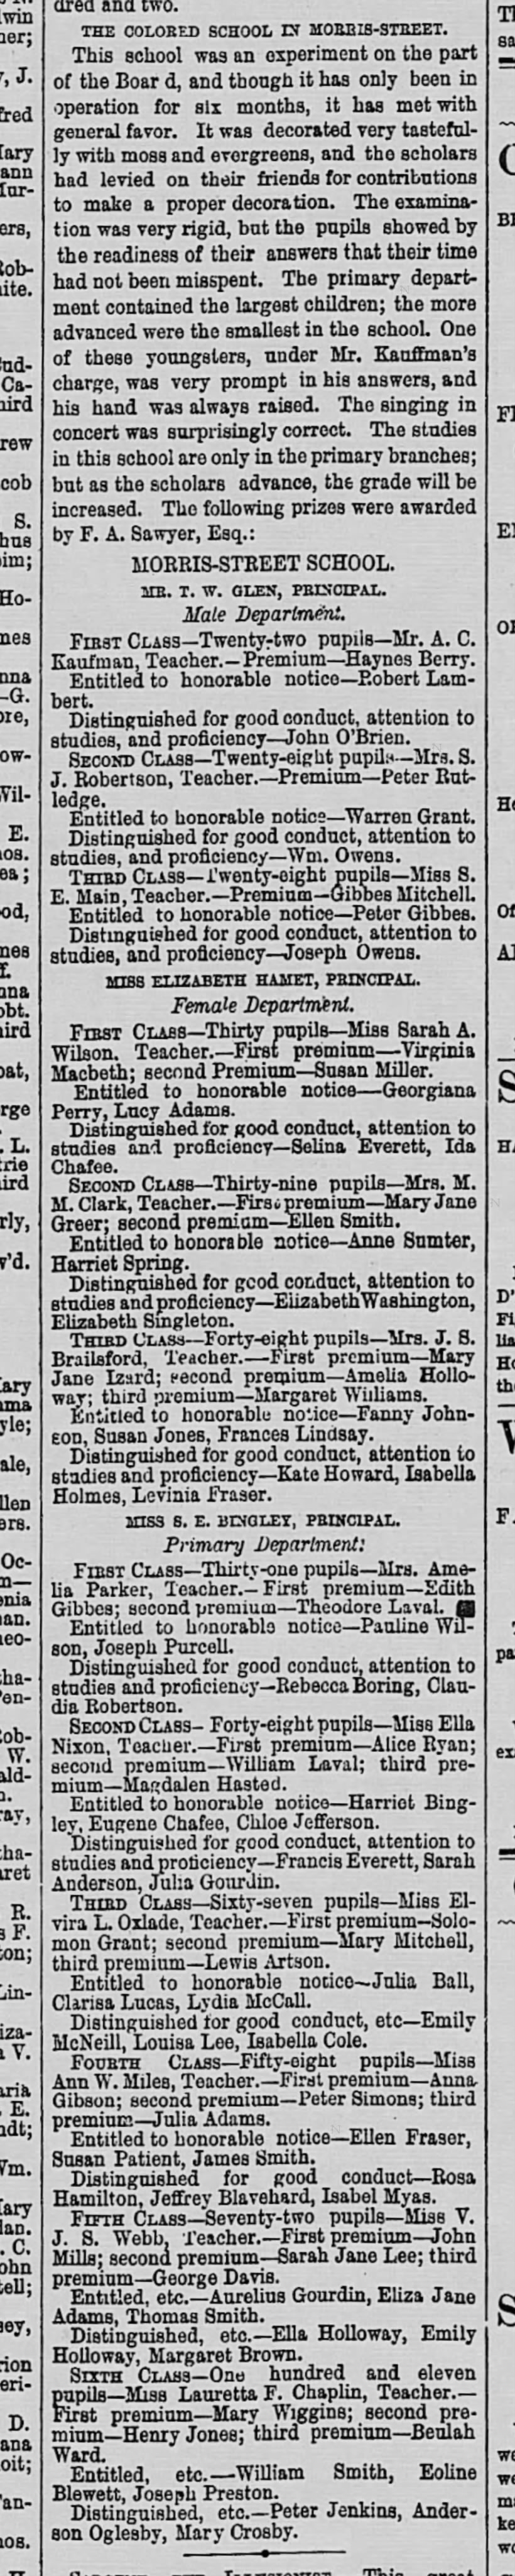 The Colored School at Morris Street, Charleston Daily News, 2 April 1868